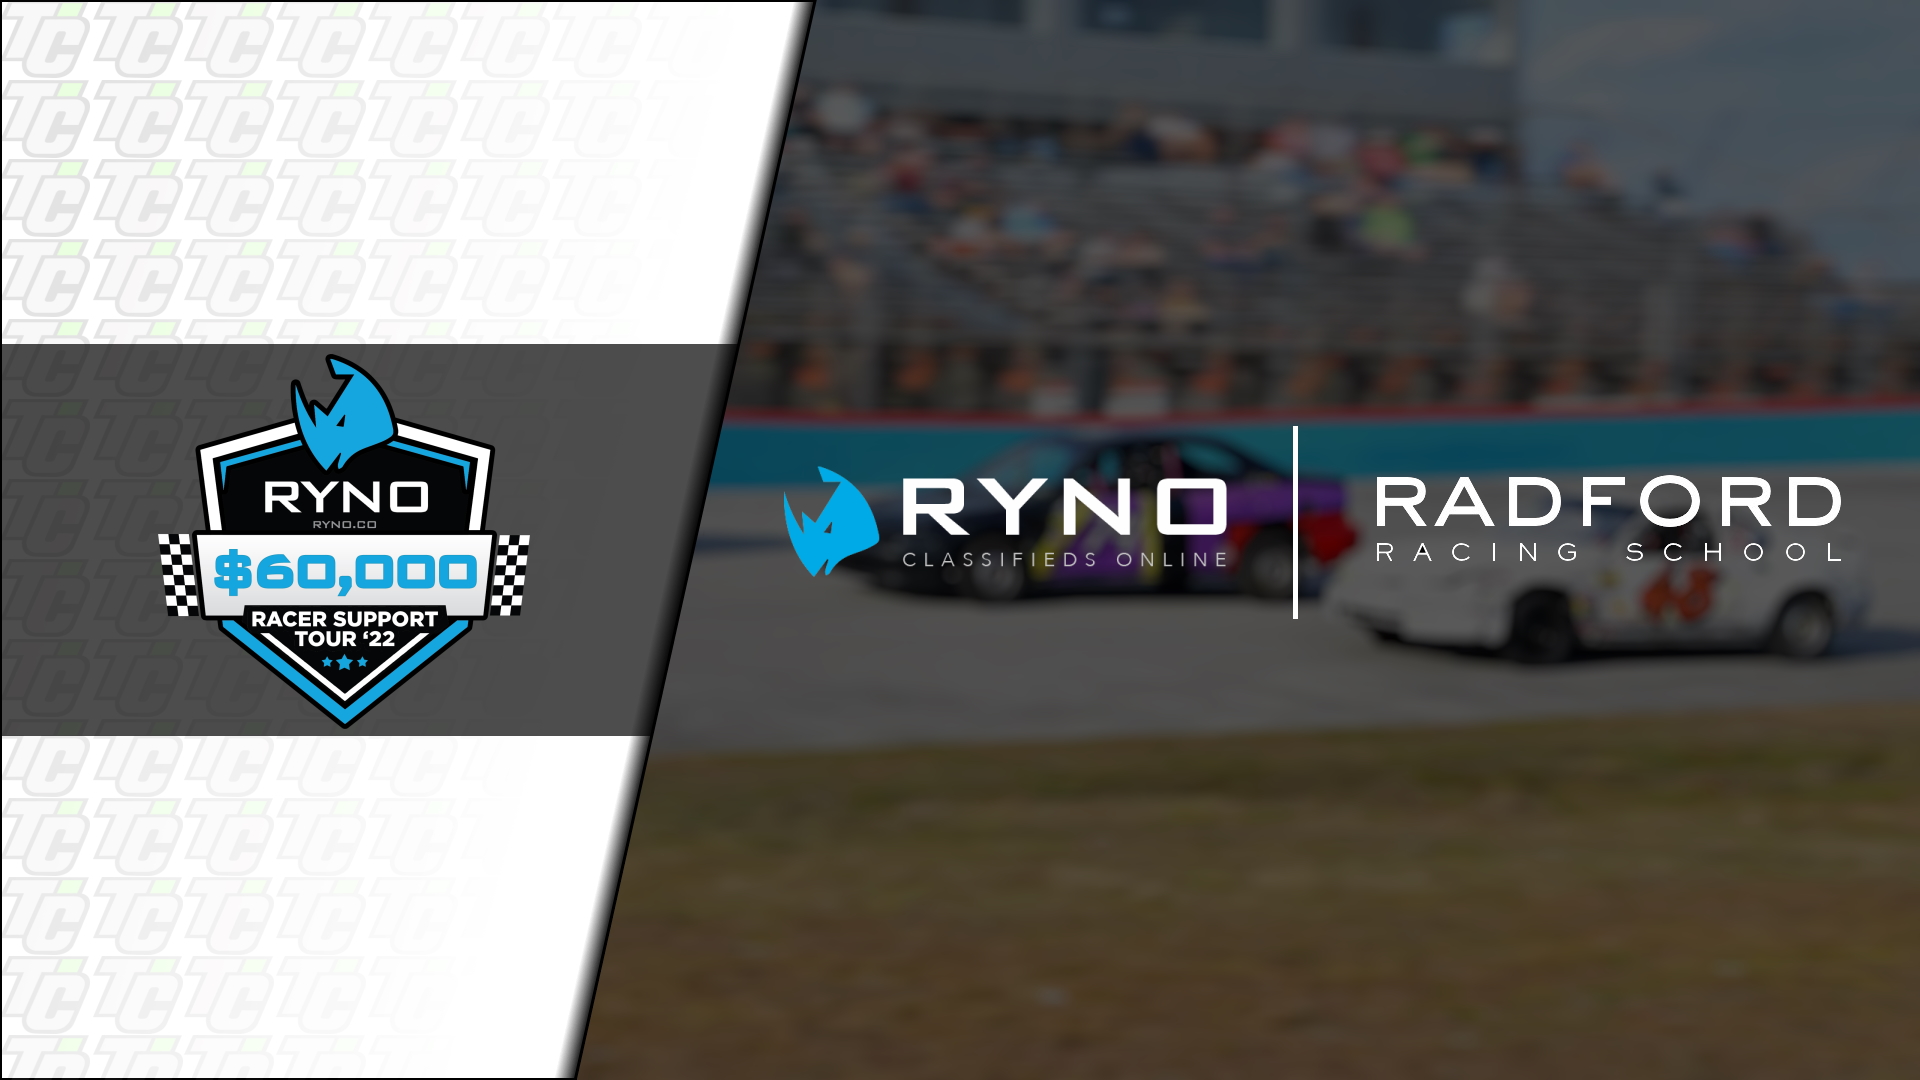 ryno racer support tour 2022